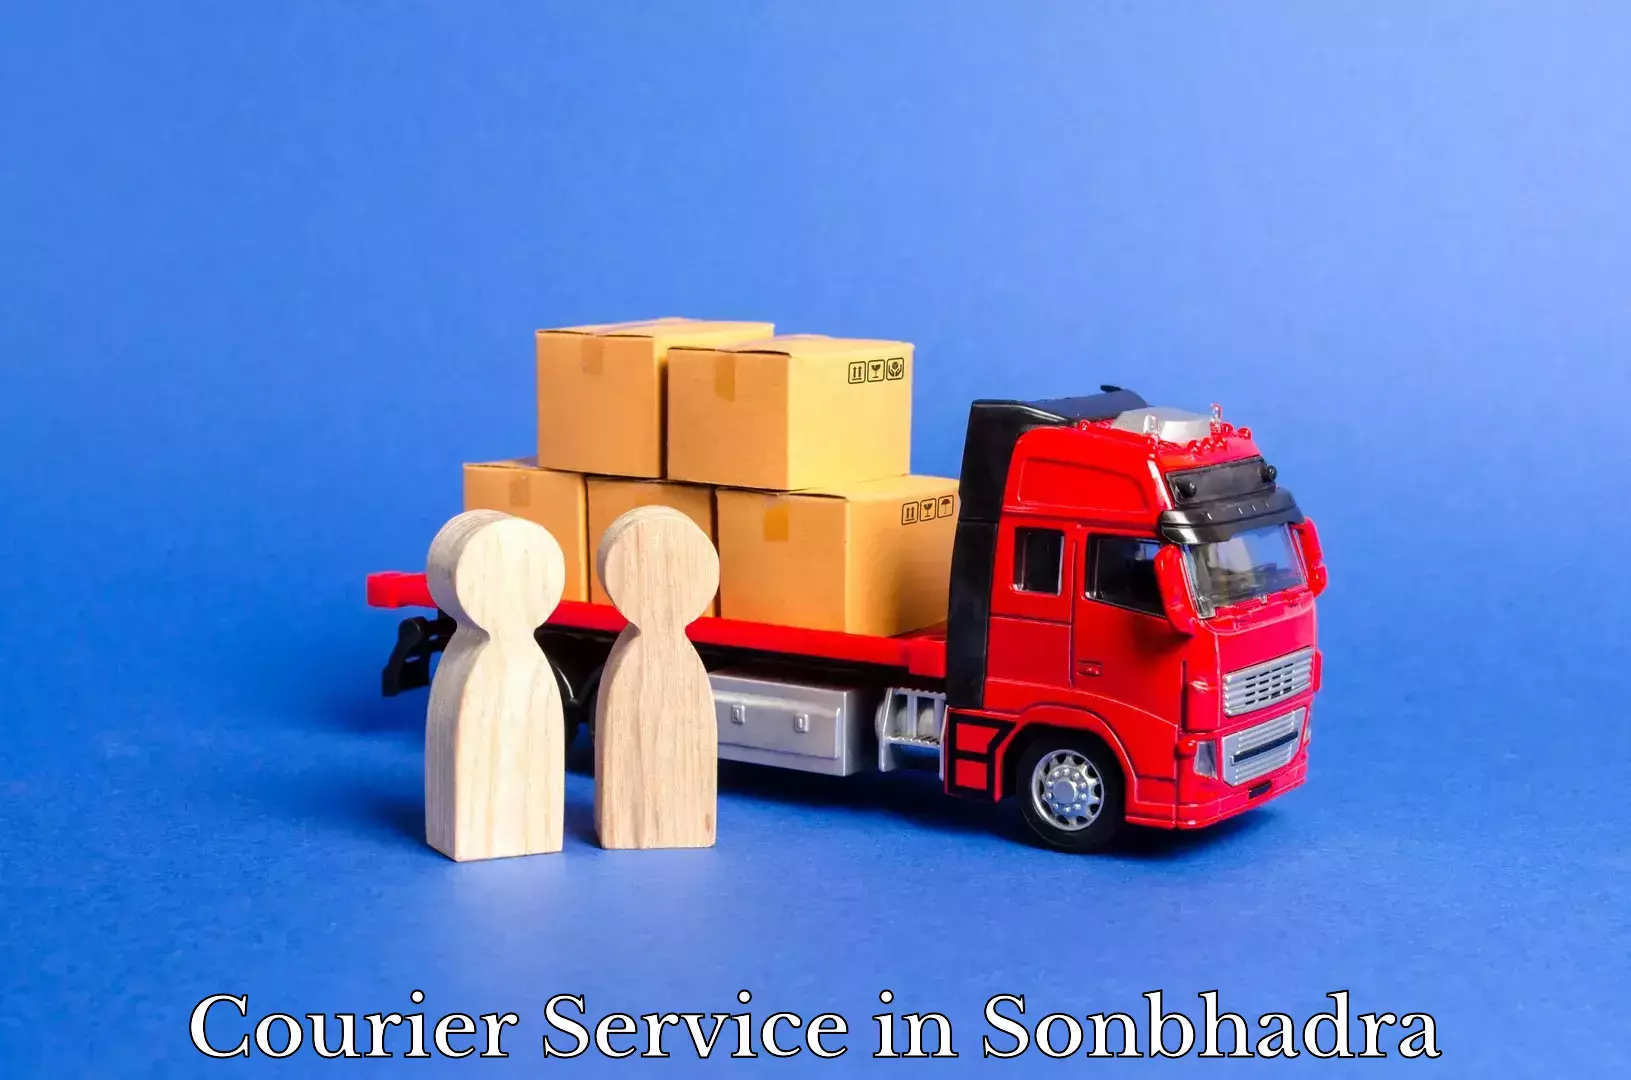 Express mail solutions in Sonbhadra